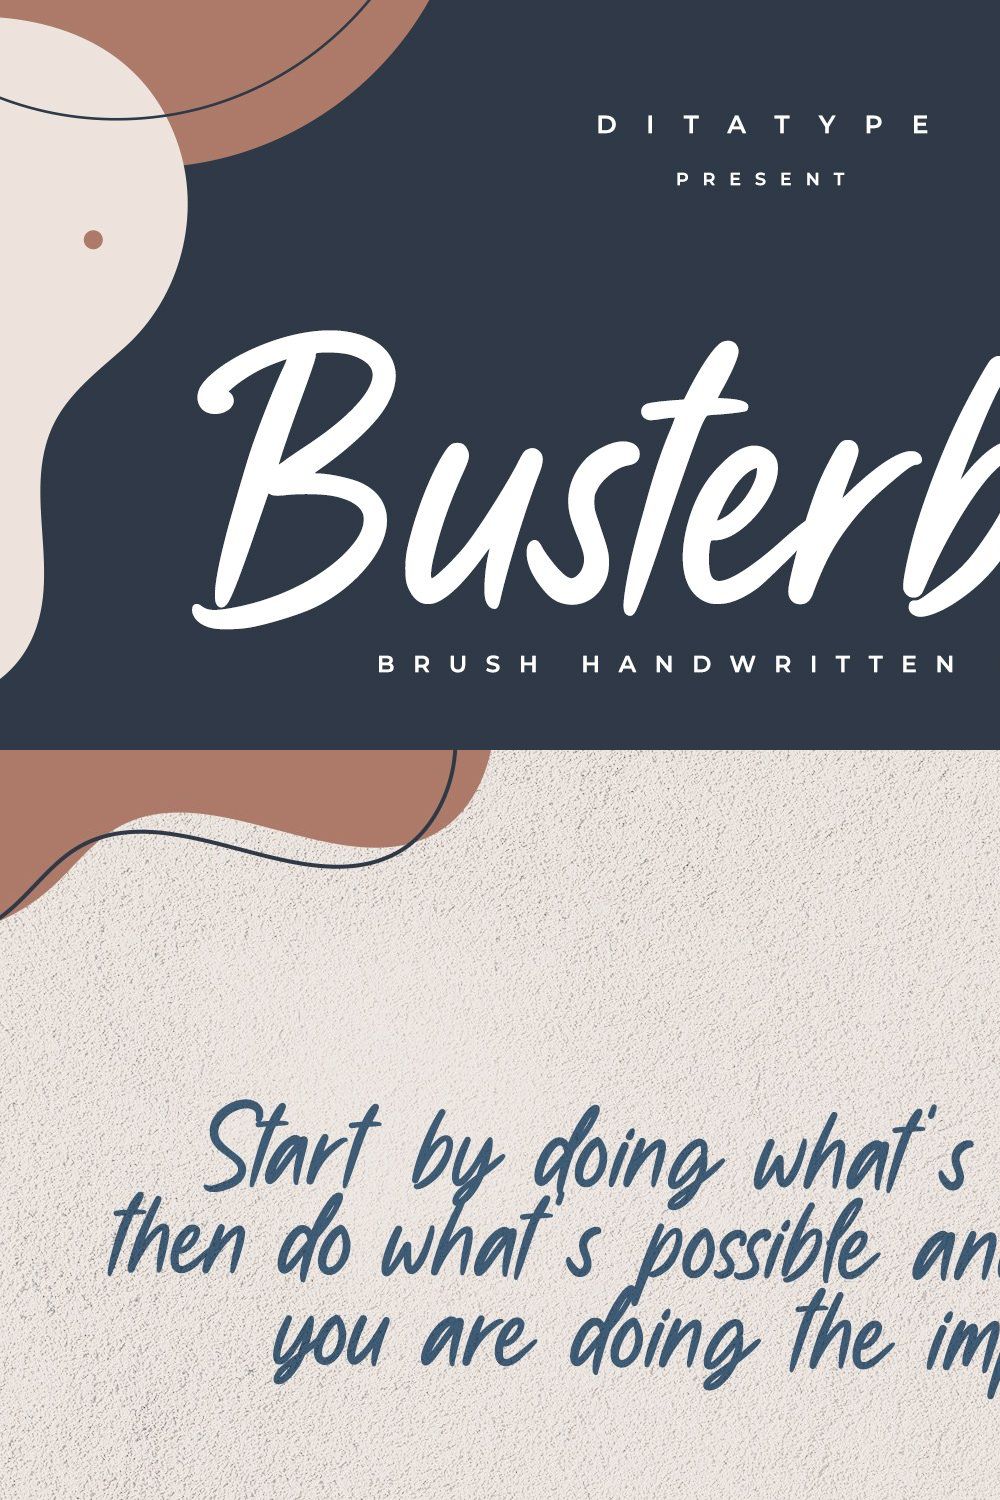 Busterball pinterest preview image.